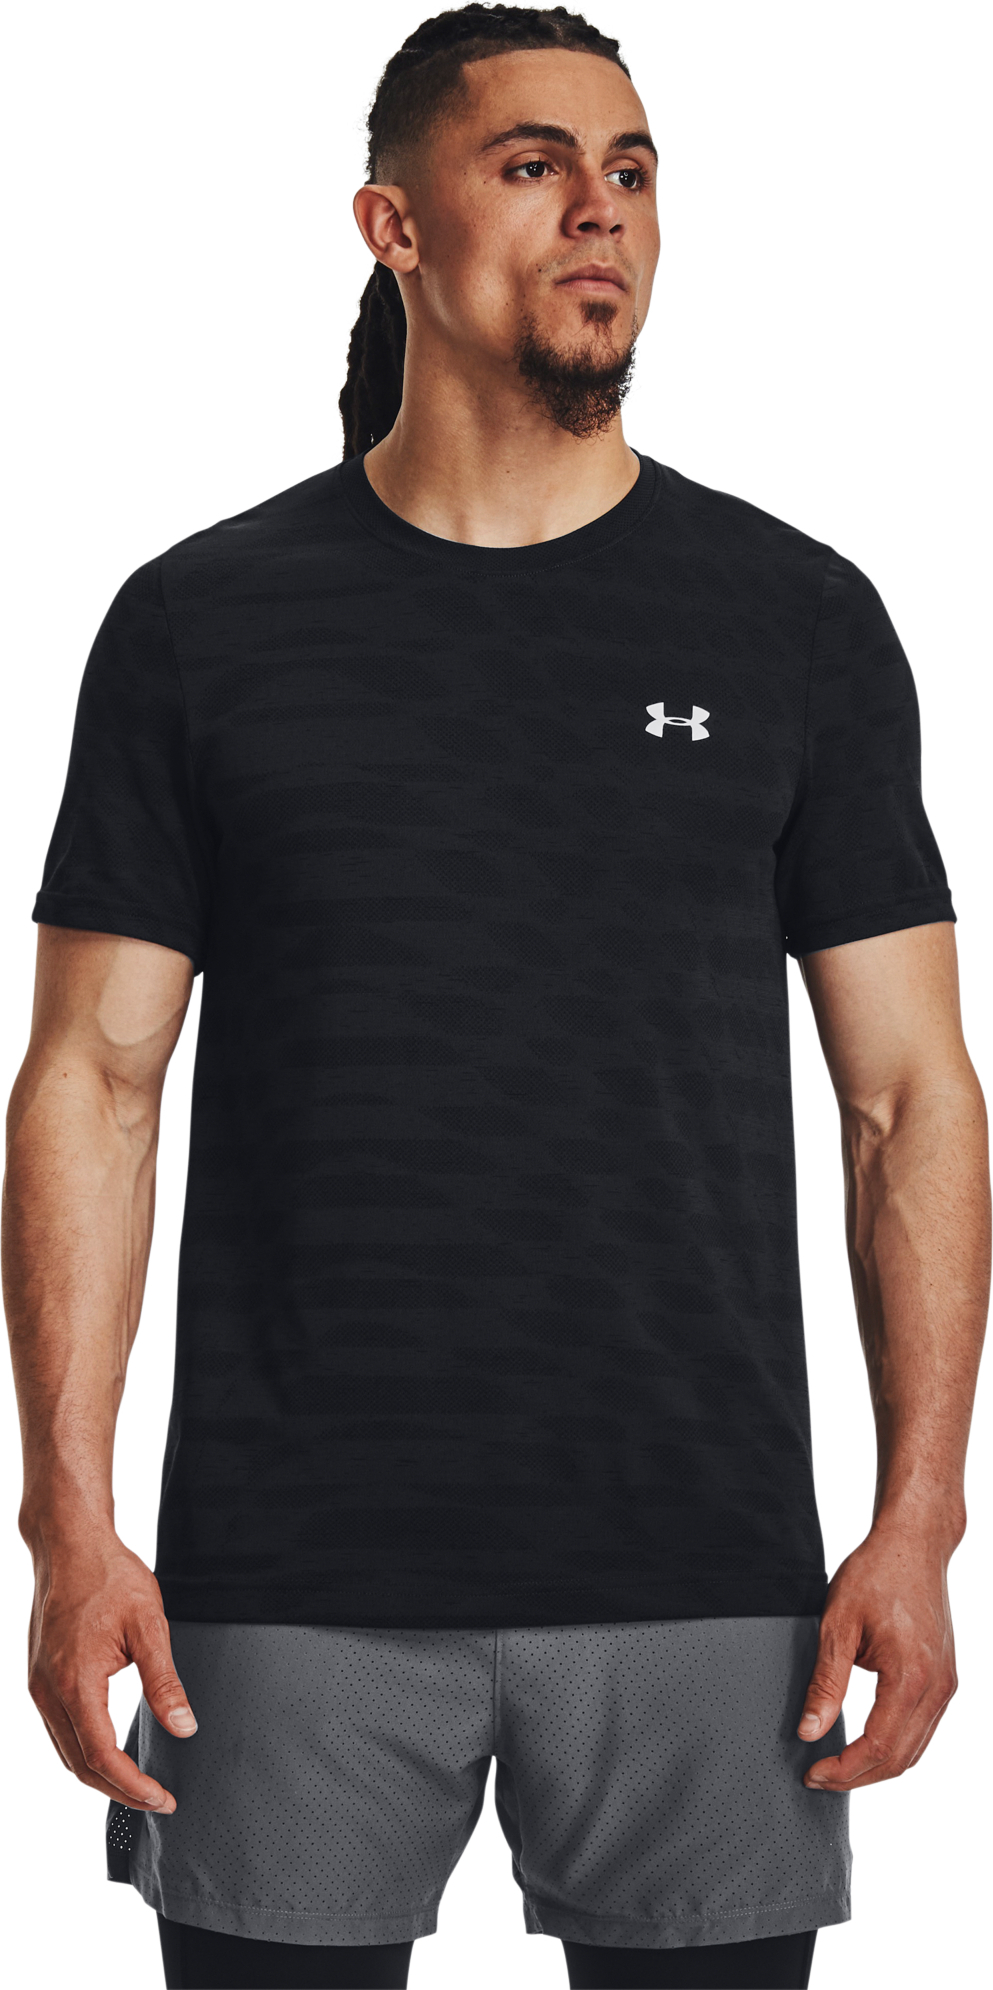 UNDER ARMOUR SEAMLESS WAVE SS 1351450-001 Black